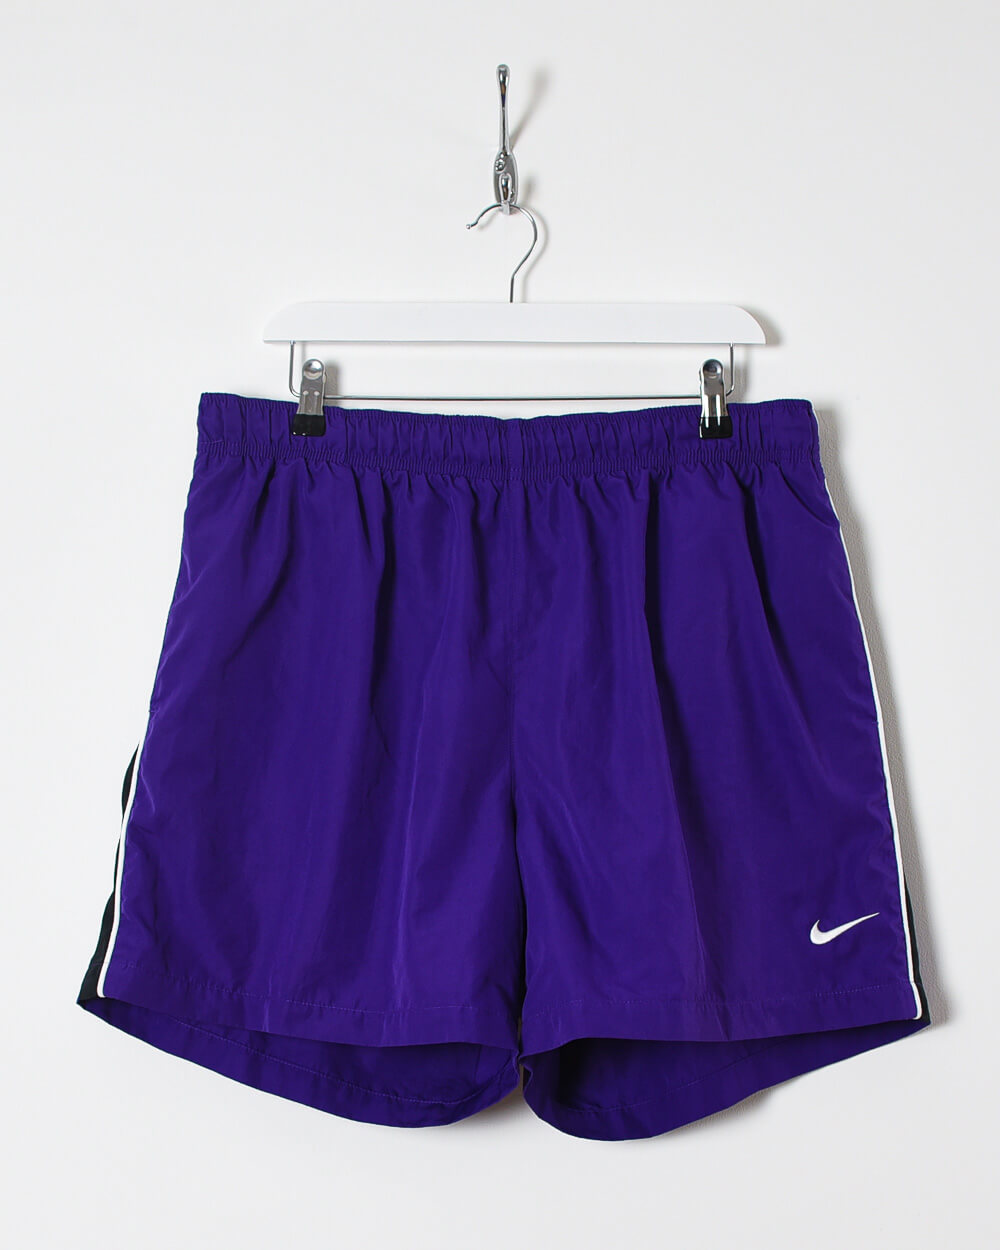 Nike Swimming Shorts - W36 L17 - Domno Vintage 90s, 80s, 00s Retro and Vintage Clothing 